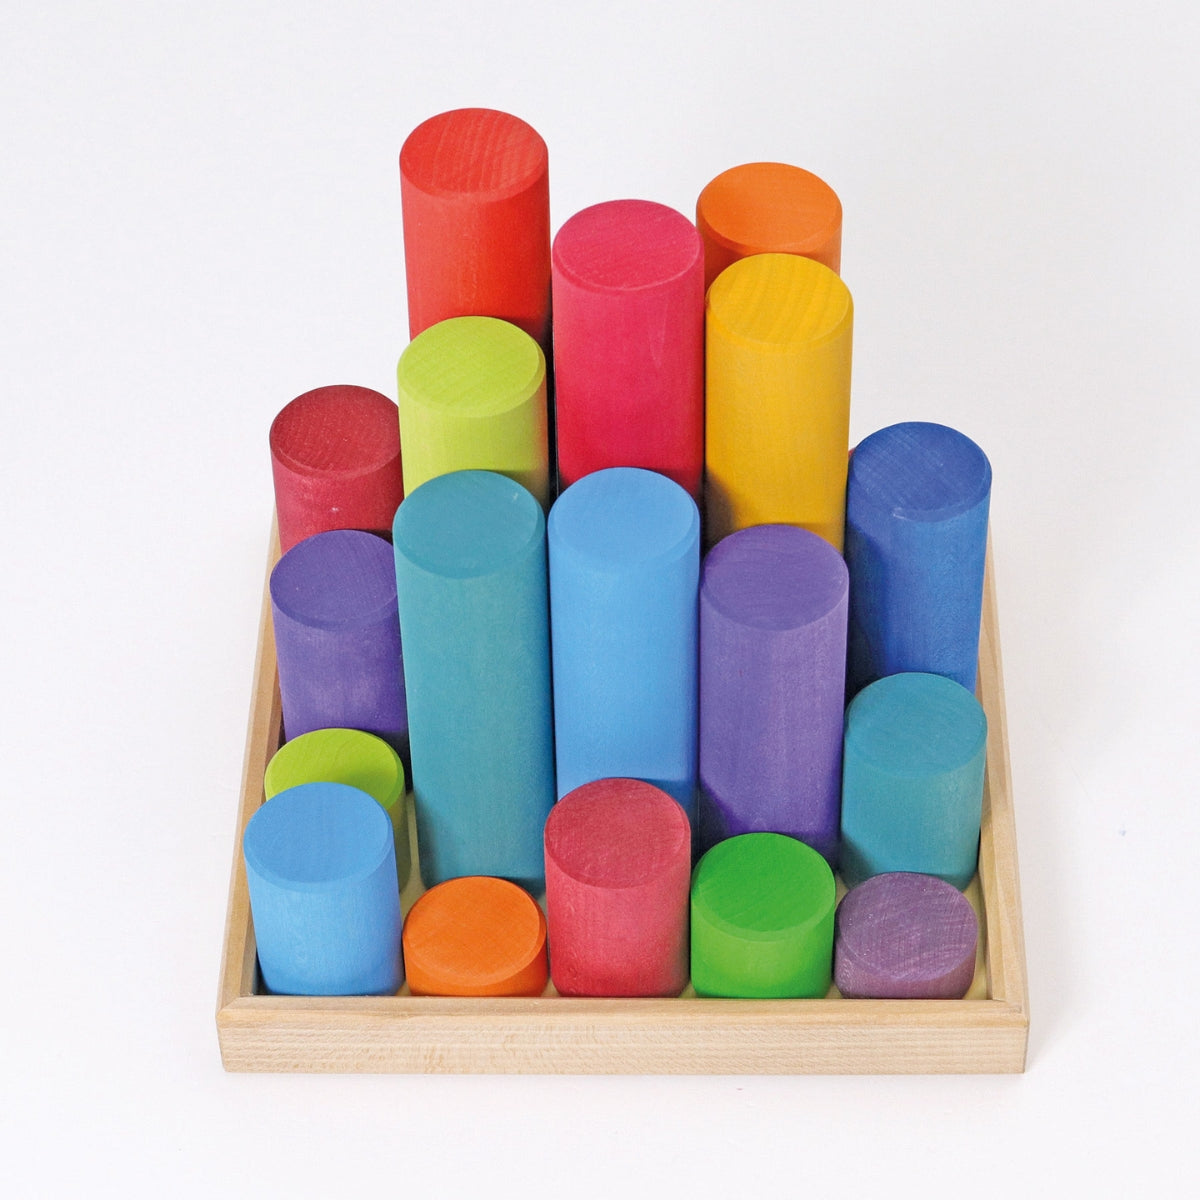 GR-10173 Grimm's Large Building Rollers Rainbow